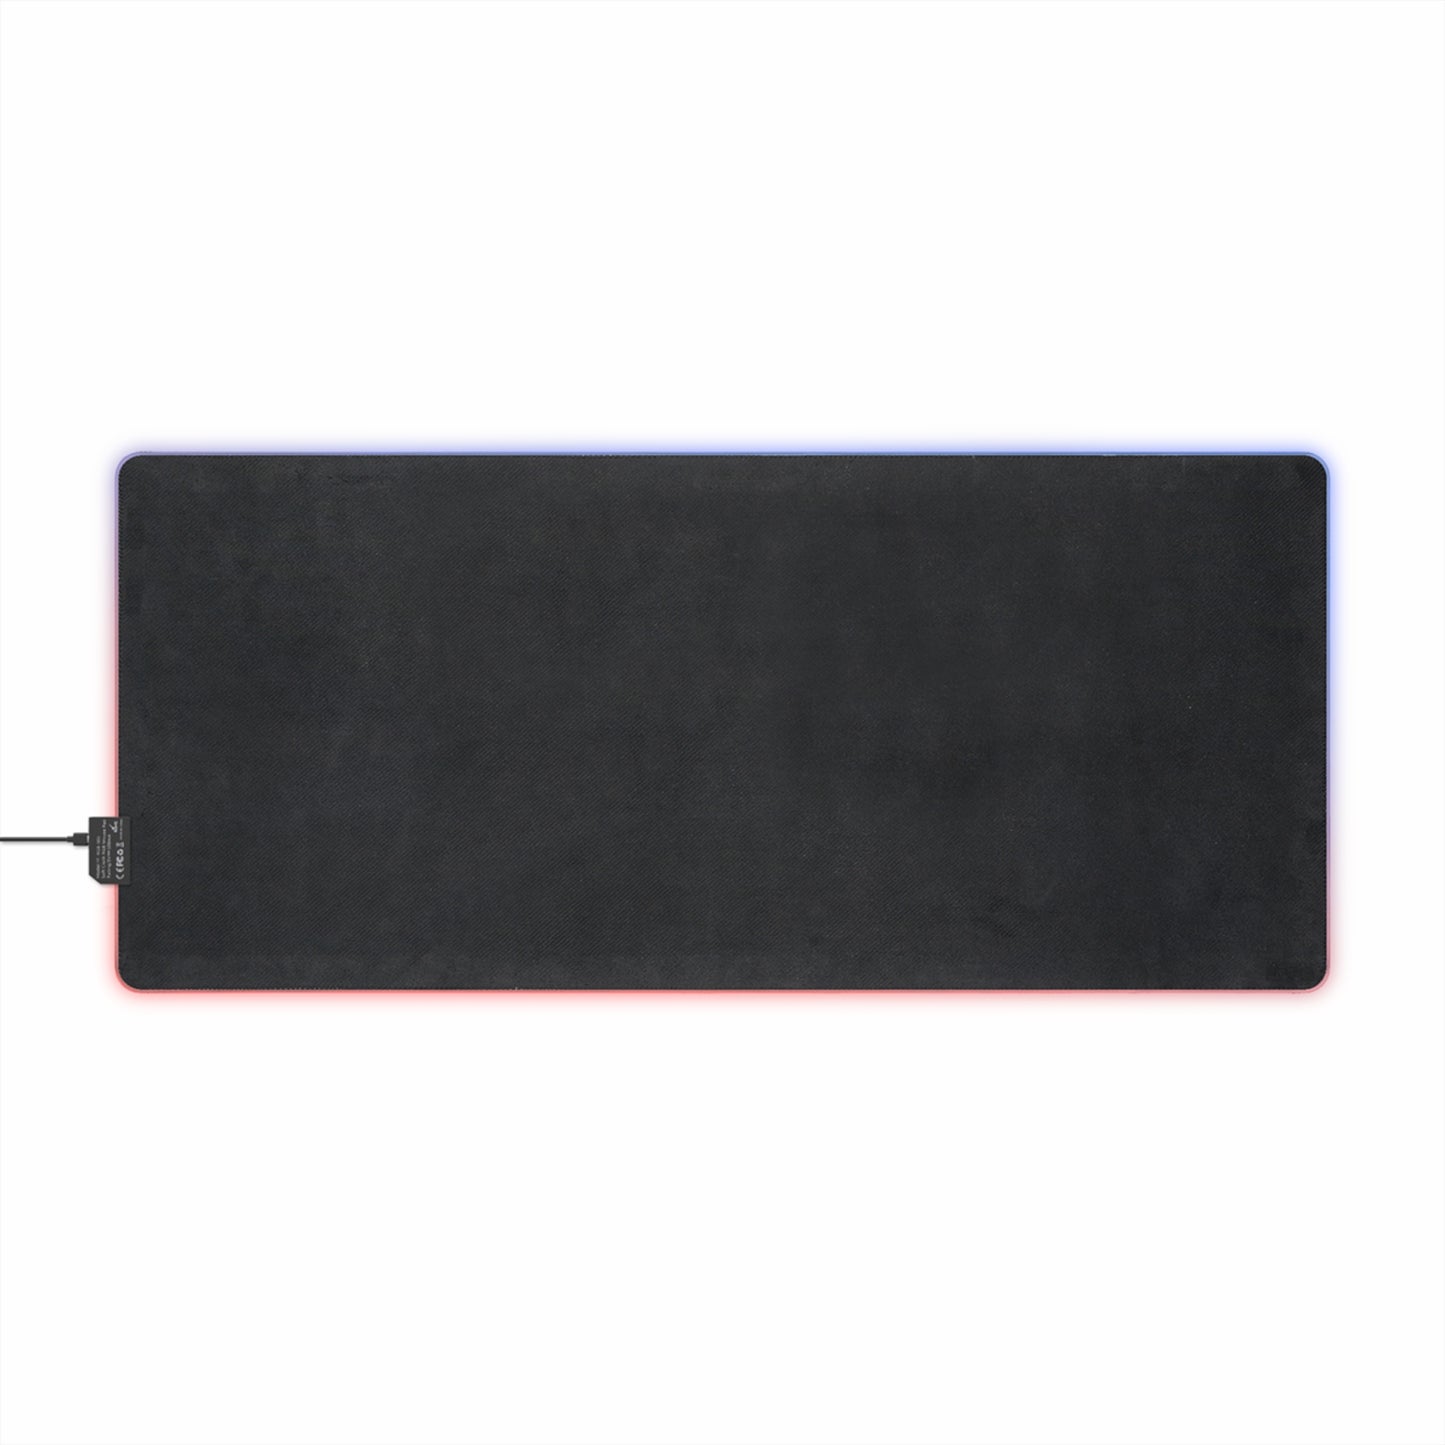 AG-14 LED Gaming Mouse Pad